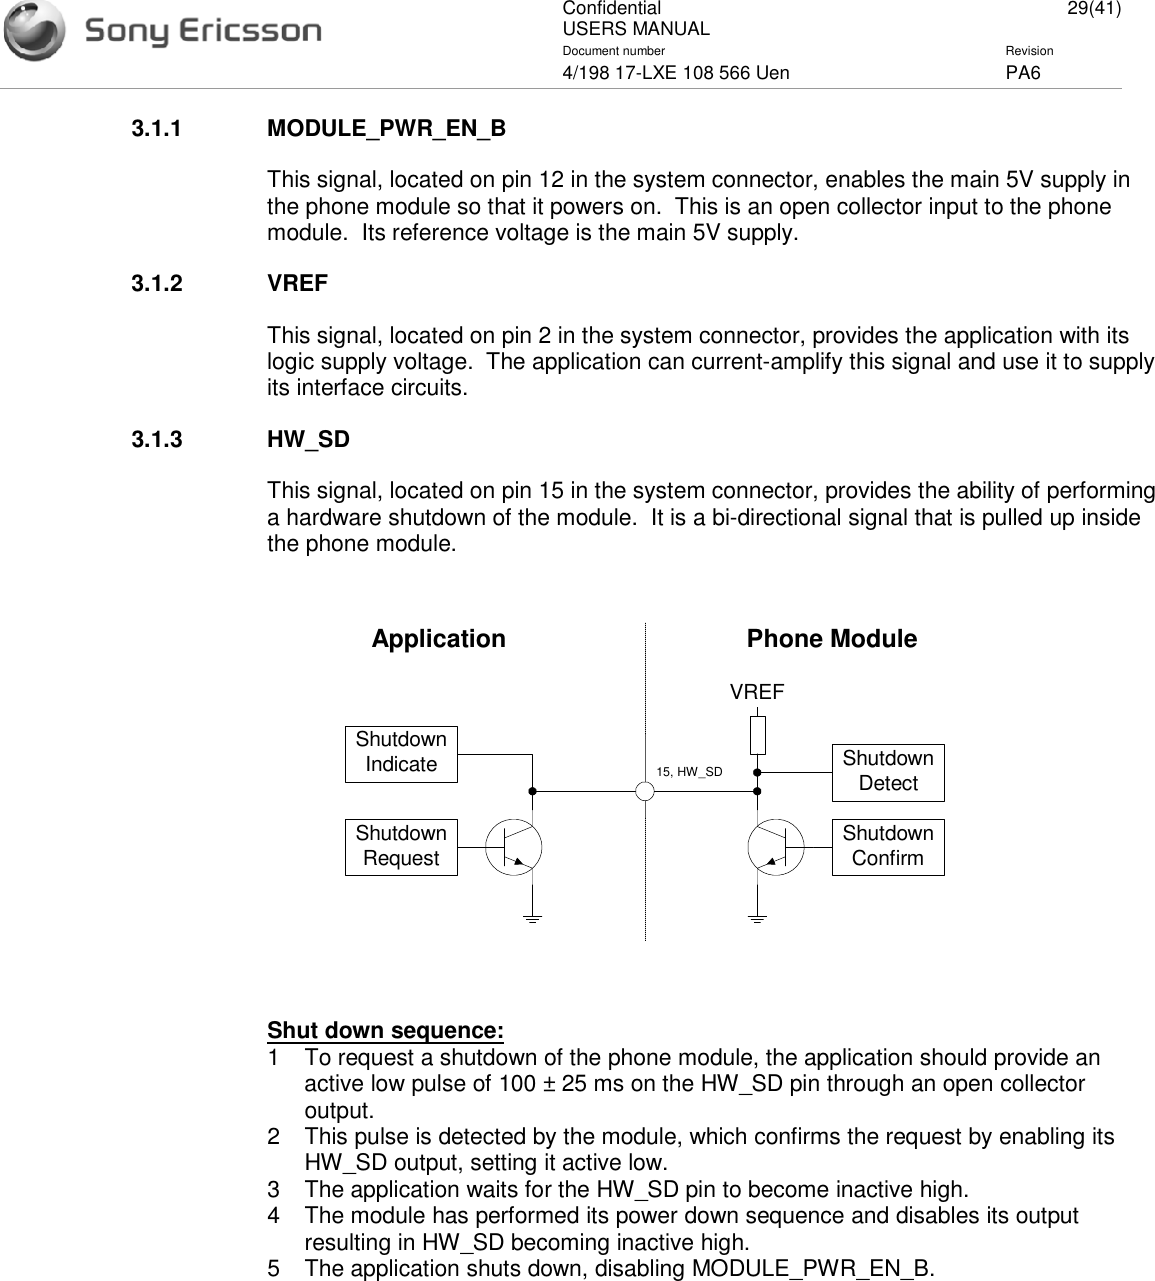 ConfidentialUSERS MANUAL 29(41)Document number Revision4/198 17-LXE 108 566 Uen PA63.1.1 MODULE_PWR_EN_BThis signal, located on pin 12 in the system connector, enables the main 5V supply inthe phone module so that it powers on. This is an open collector input to the phonemodule. Its reference voltage is the main 5V supply.3.1.2 VREFThis signal, located on pin 2 in the system connector, provides the application with itslogic supply voltage. The application can current-amplify this signal and use it to supplyits interface circuits.3.1.3 HW_SDThis signal, located on pin 15 in the system connector, provides the ability of performinga hardware shutdown of the module. It is a bi-directional signal that is pulled up insidethe phone module.Shut down sequence:1 To request a shutdown of the phone module, the application should provide anactive low pulse of 100 ± 25 ms on the HW_SD pin through an open collectoroutput.2 This pulse is detected by the module, which confirms the request by enabling itsHW_SD output, setting it active low.3 The application waits for the HW_SD pin to become inactive high.4 The module has performed its power down sequence and disables its outputresulting in HW_SD becoming inactive high.5 The application shuts down, disabling MODULE_PWR_EN_B.ShutdownIndicateShutdownRequest ShutdownConfirmShutdownDetectVREF15, HW_SDApplication Phone Module